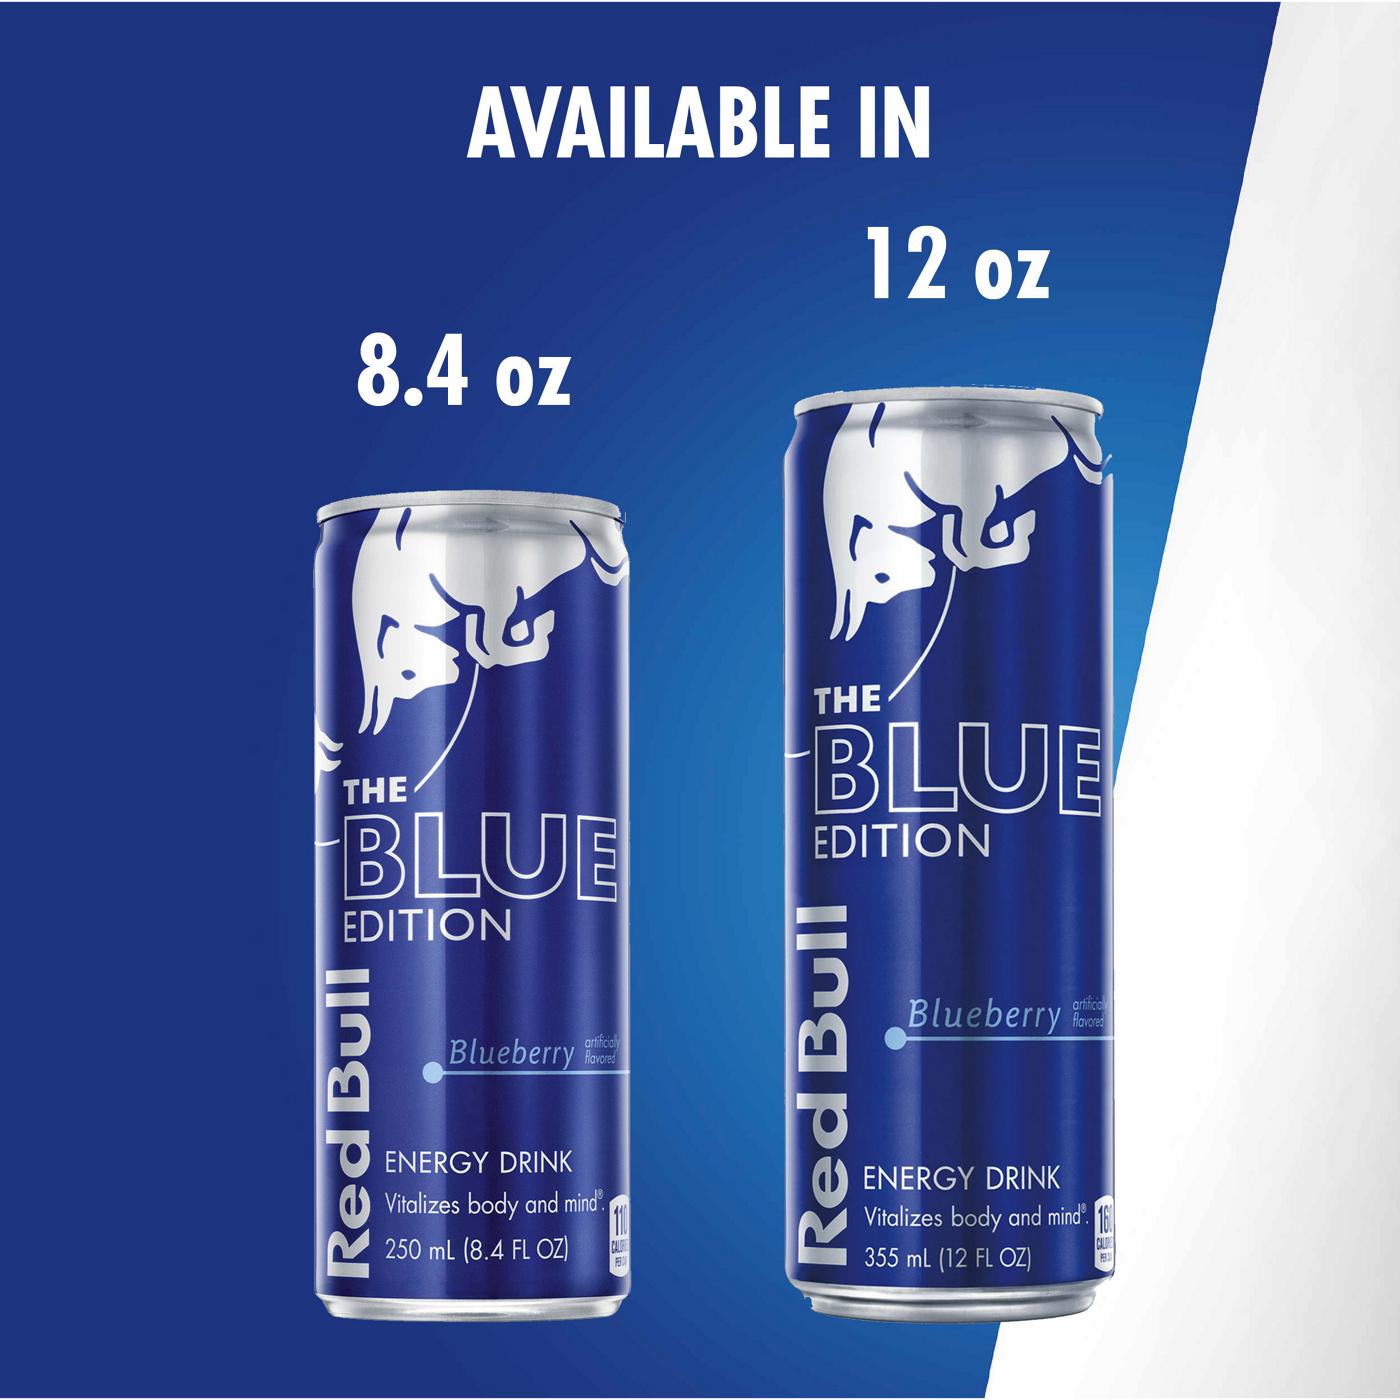 Red Bull The Blue Edition Blueberry Energy Drink; image 7 of 7